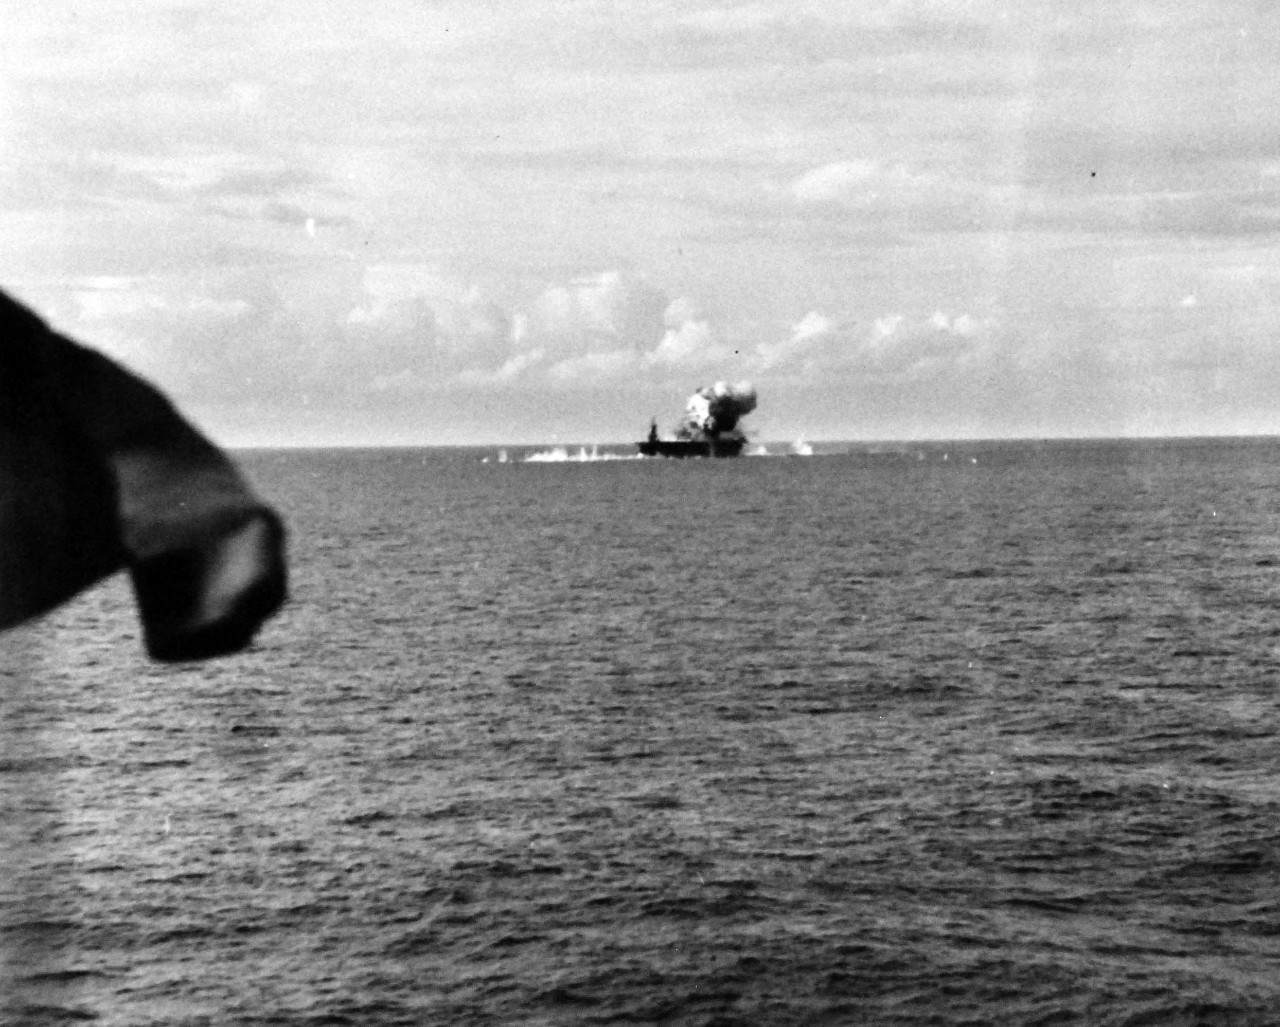 80-G-270667:  USS Santee (CVE-29), October 25, 1944.  Japanese suicide plane attacking USS Santee (CVE-29), hitting after end of flight deck off Leyte Gulf, Philippines, as seen from USS Suwannee (CVL-27).  Official U.S. Navy photograph, now in the collections of the National Archives.  